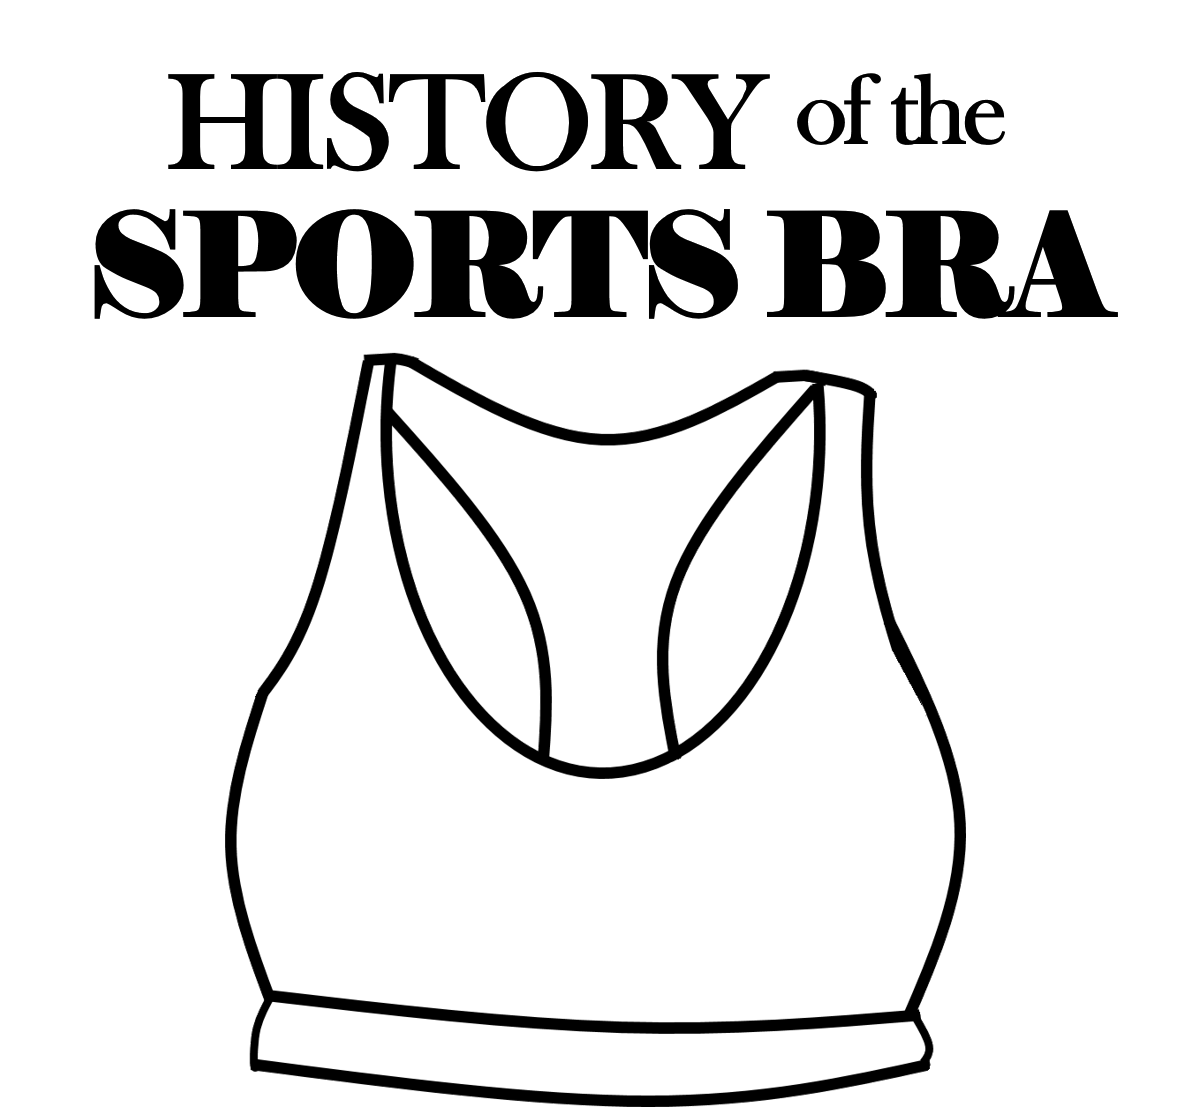 HISTORY OF THE SPORTS BRA